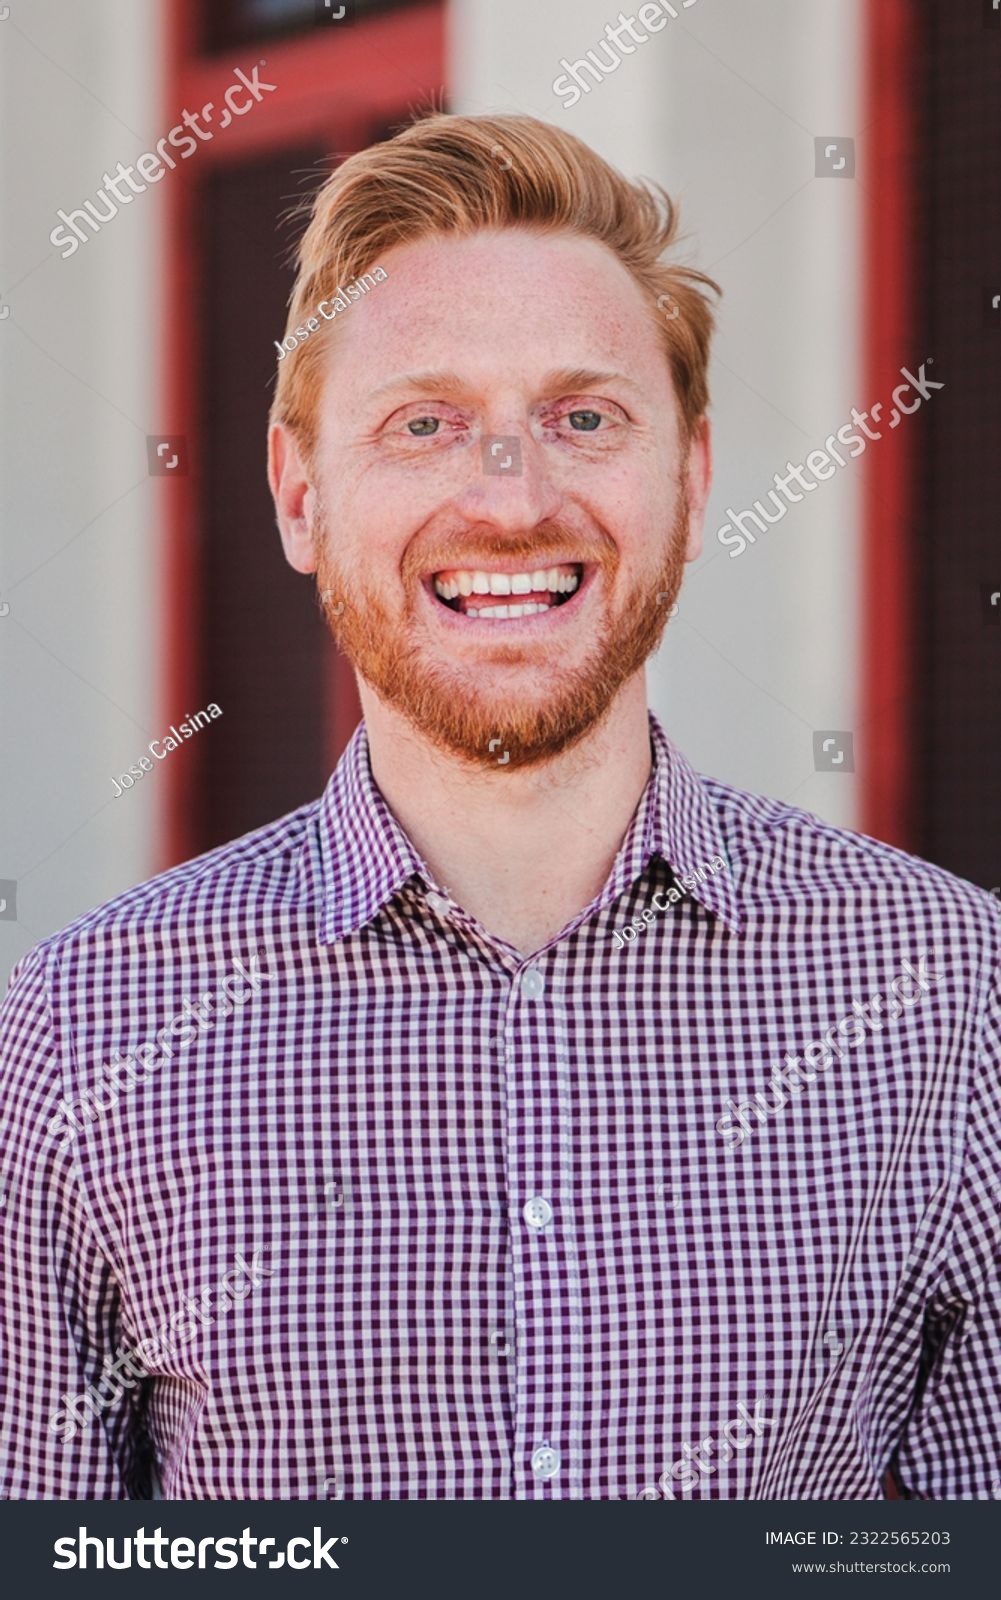 Vertical individual portrait of a formal joyful redhead formal guy standing outdoors smiling and looking at camera. Front view of positive young adult employee man laughing with friendly expression #2322565203